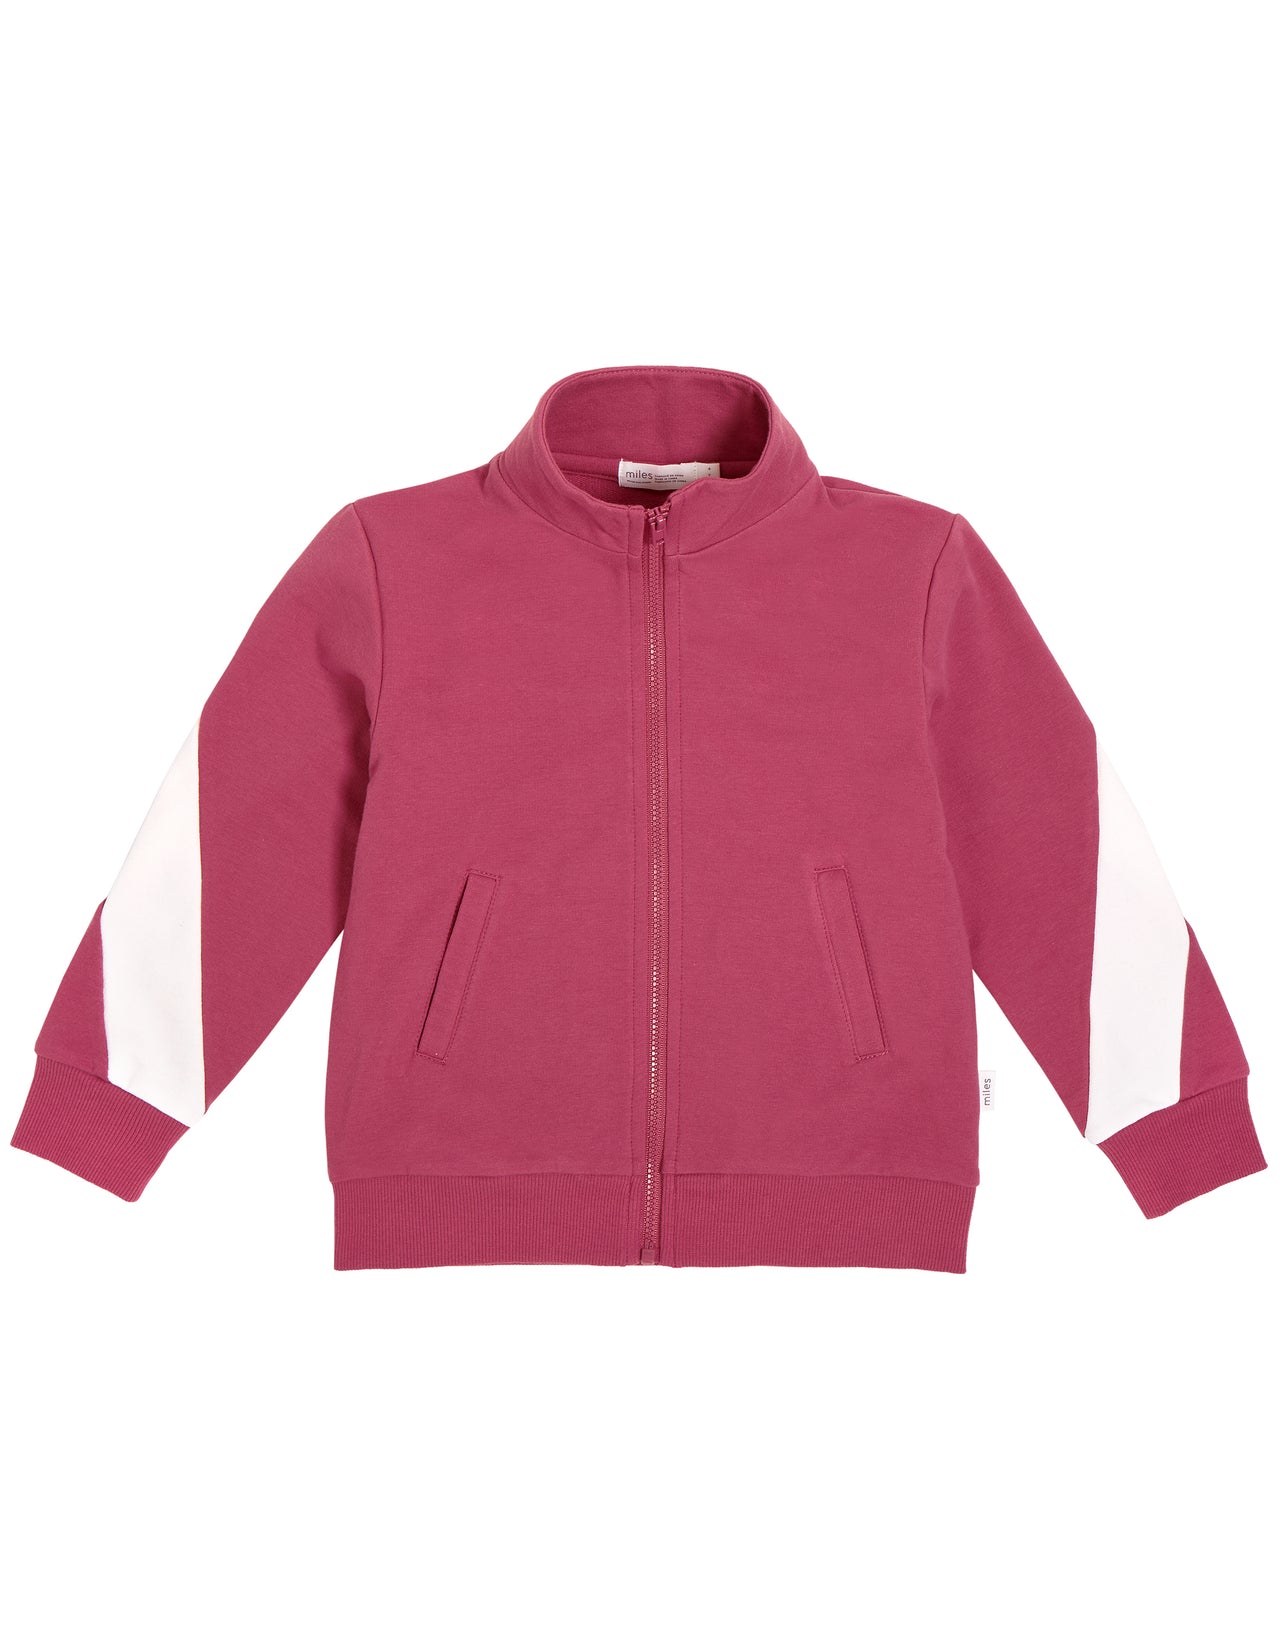 MILES GIRLS ZIP-UP TRACK JACKET - DUSTY PINK